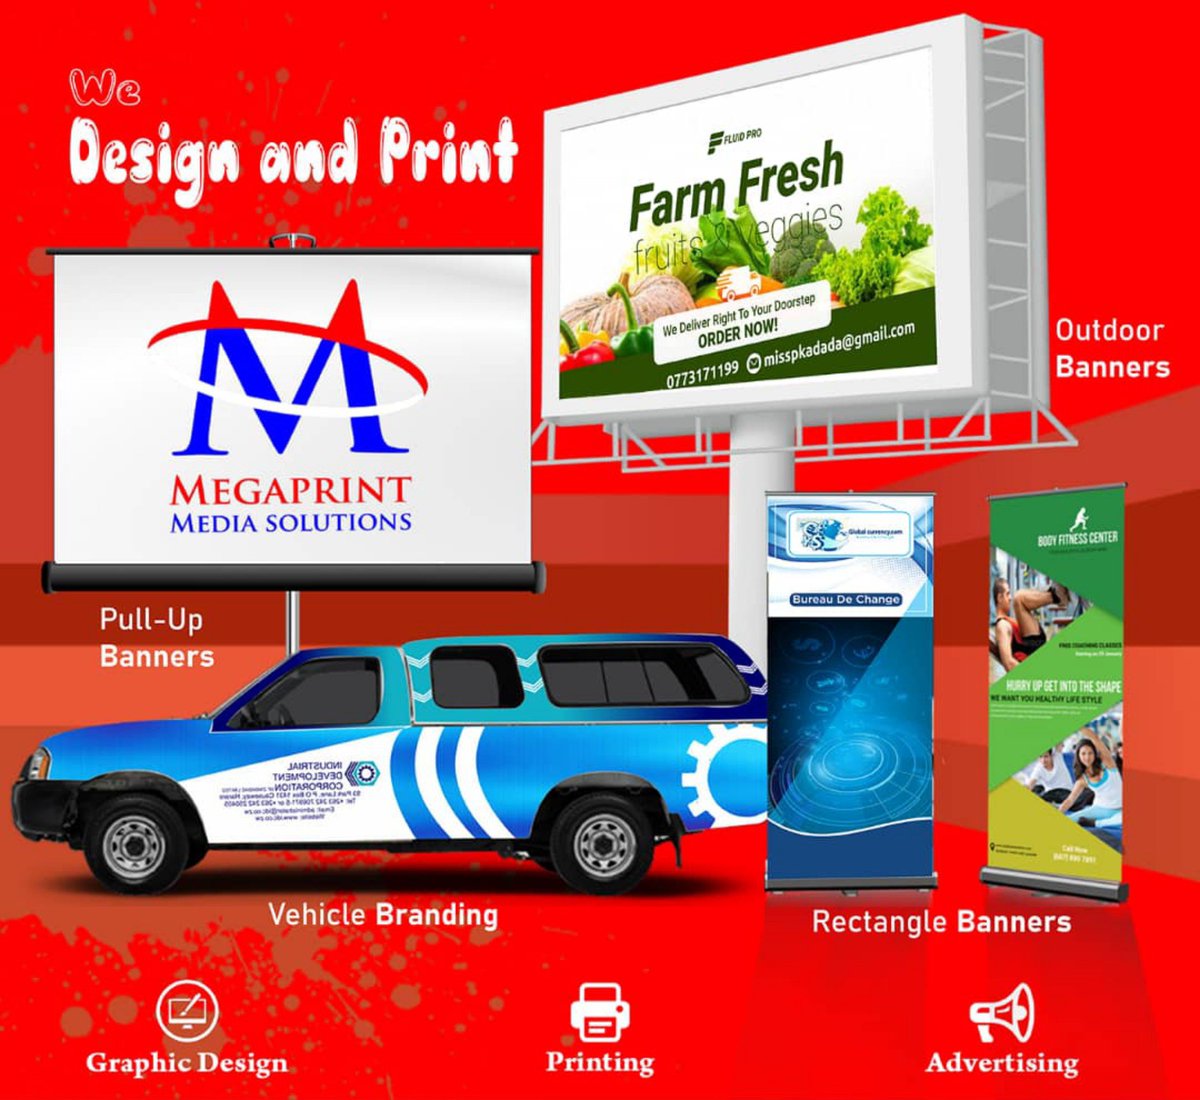 For all your designing and printing prerequisites, think MegaPrint Media solutions.

• Outdoor banners
• Rectangle Banners
• Pull-up banners
• X-frames 
• Teardrops
• Exhibition tents #weprint #wedesign 

Contact us on: +263779772080/+263777371659/+263777371652